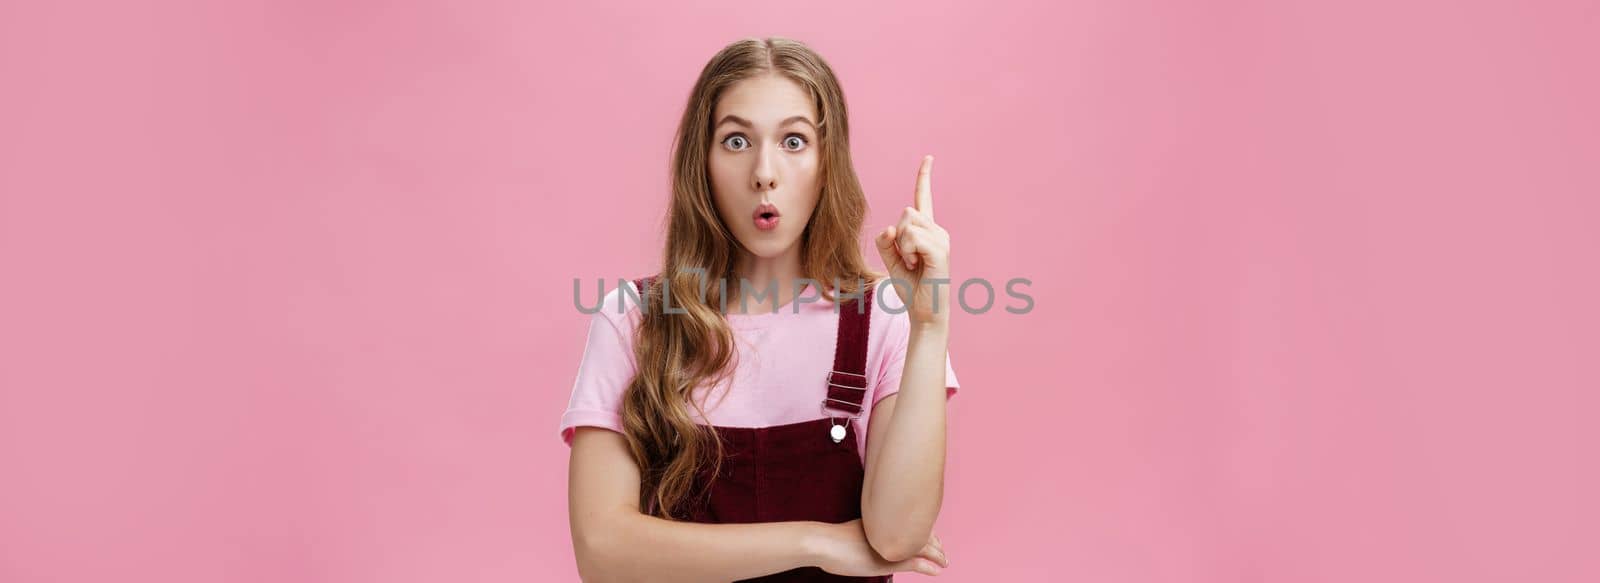 Young smart and creative female student sharing with team awesome idea coming in mind raising index finger in eureka gesture looking excited at camera folding lips saying suggestion over pink wall. Body language, body-positive and gestures concept